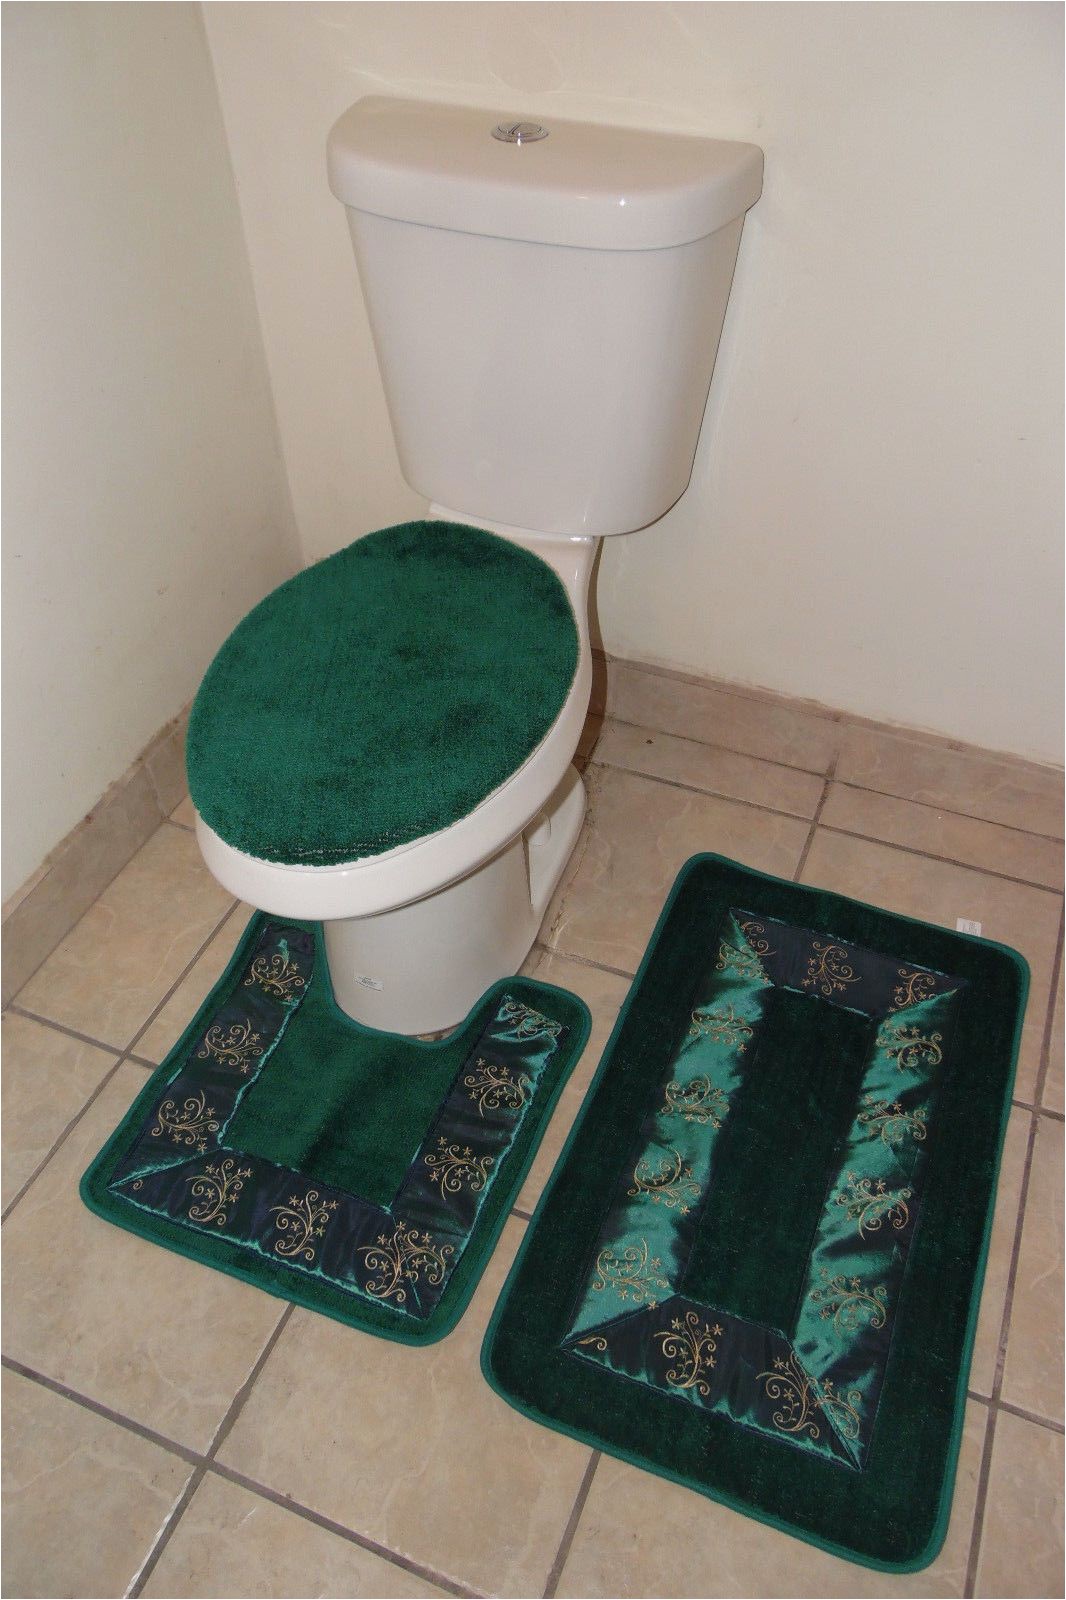 Contour Bathroom Rug Sets Bathmats Rugs and toilet Covers 3pc 5 Hunter Green